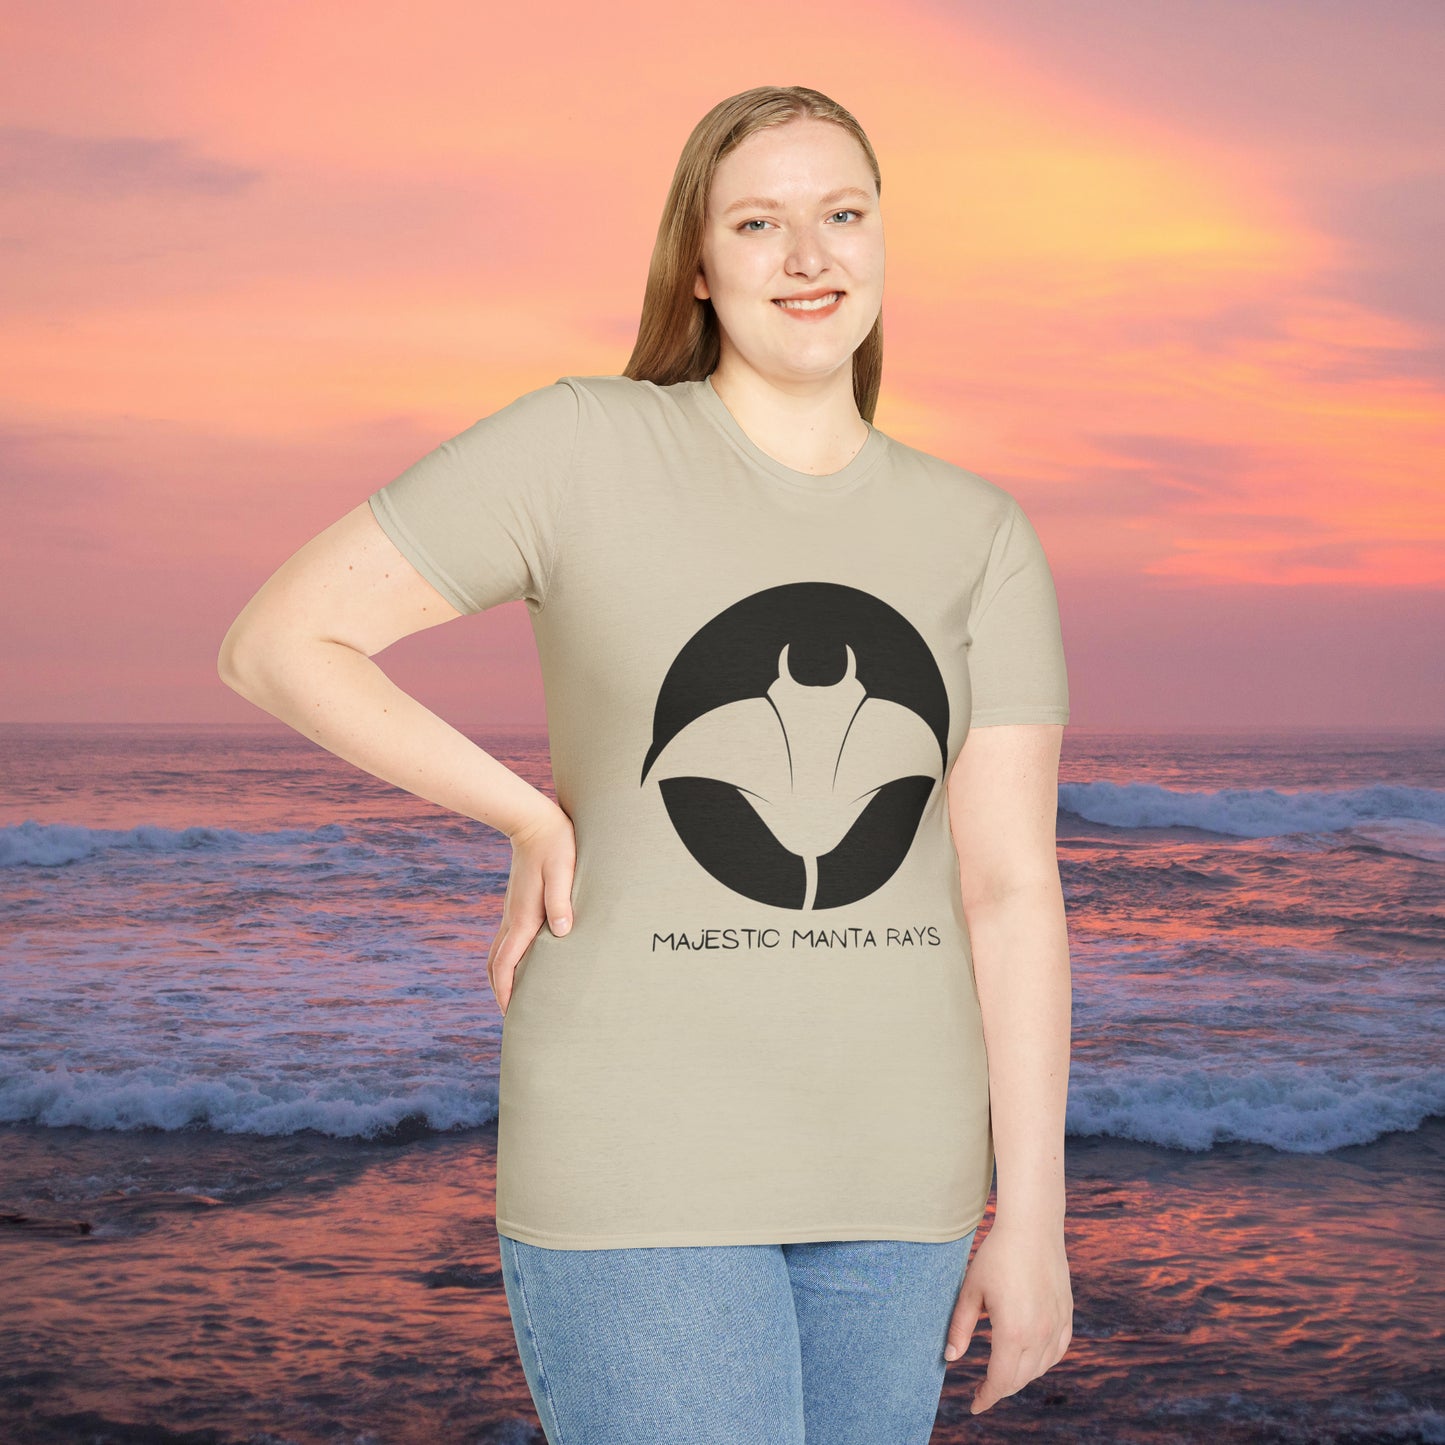 Black and white Majestic Manta Rays Design on this Unisex Softstyle T-Shirt. These giants seemingly fly through the water so gracefully, just watch and don’t touch.